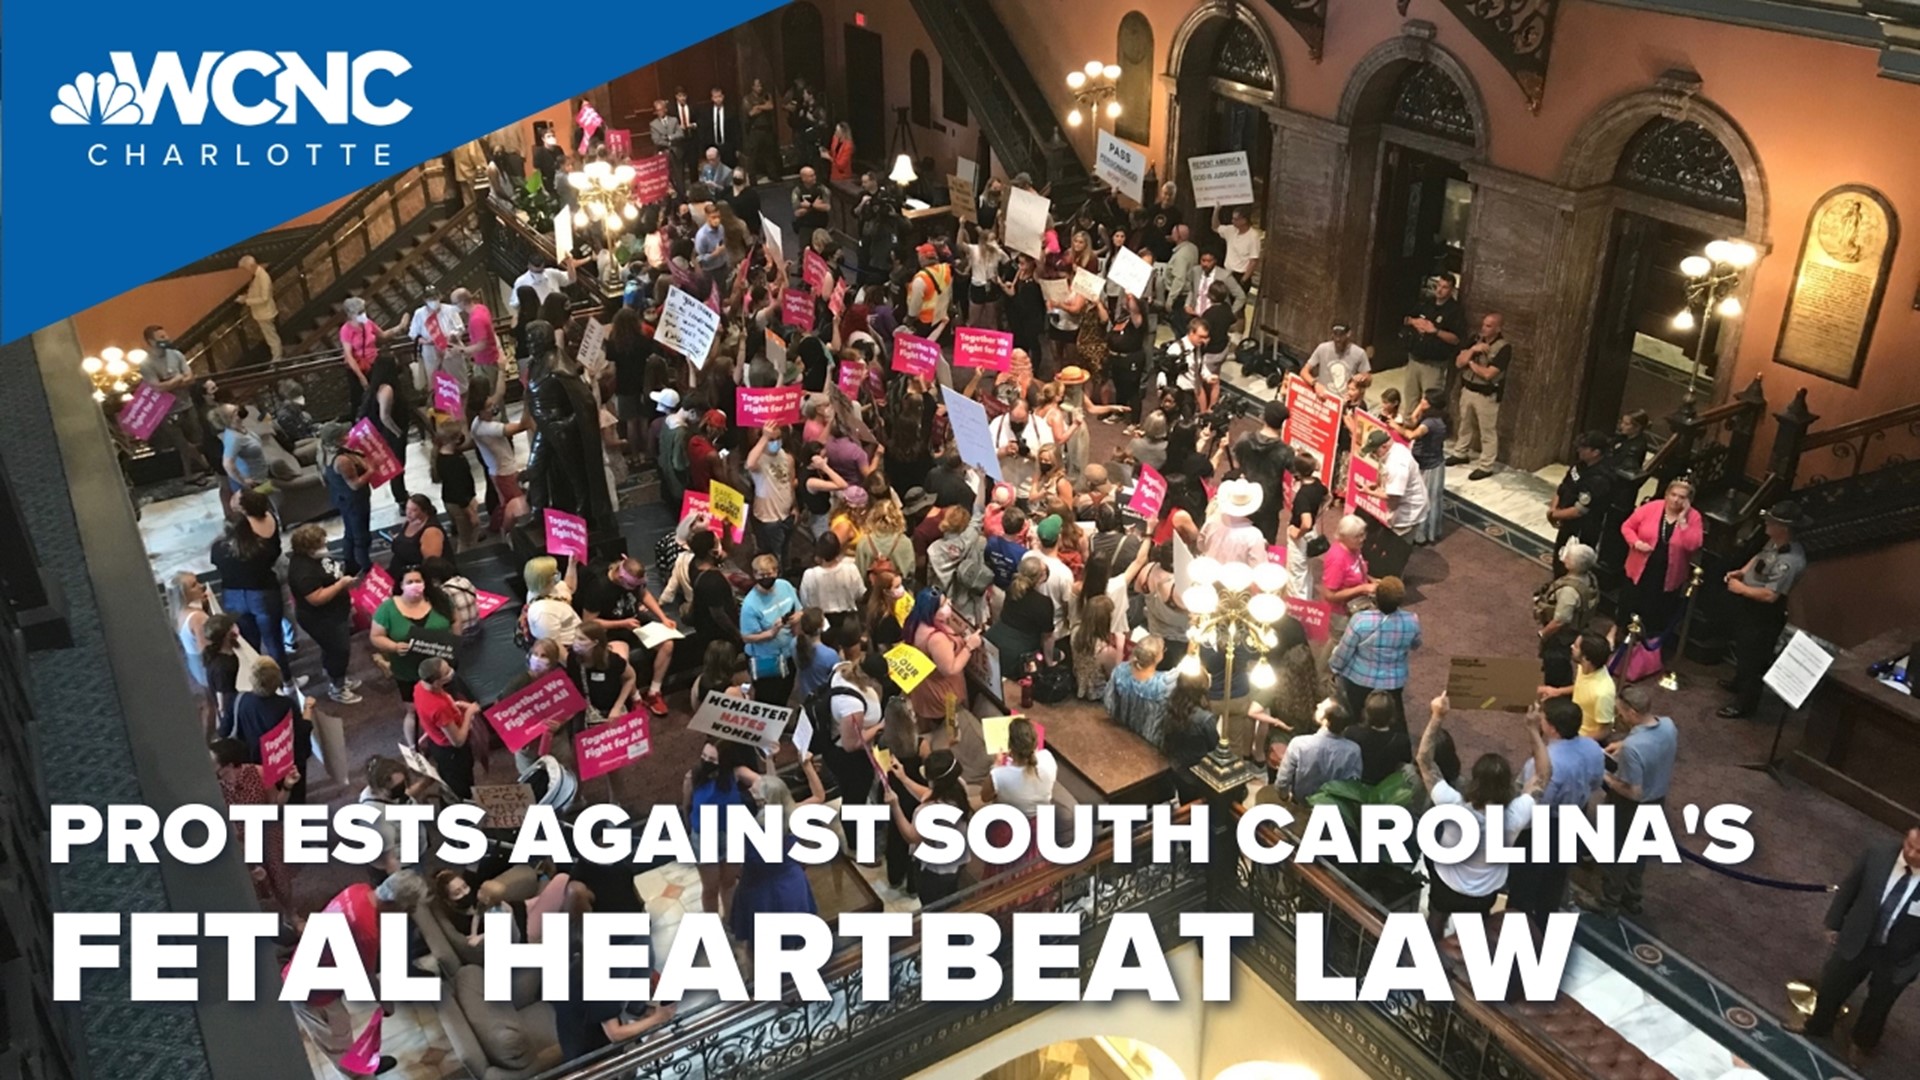 Impassioned protests from both sides of the abortion debate were seen in South Carolina.